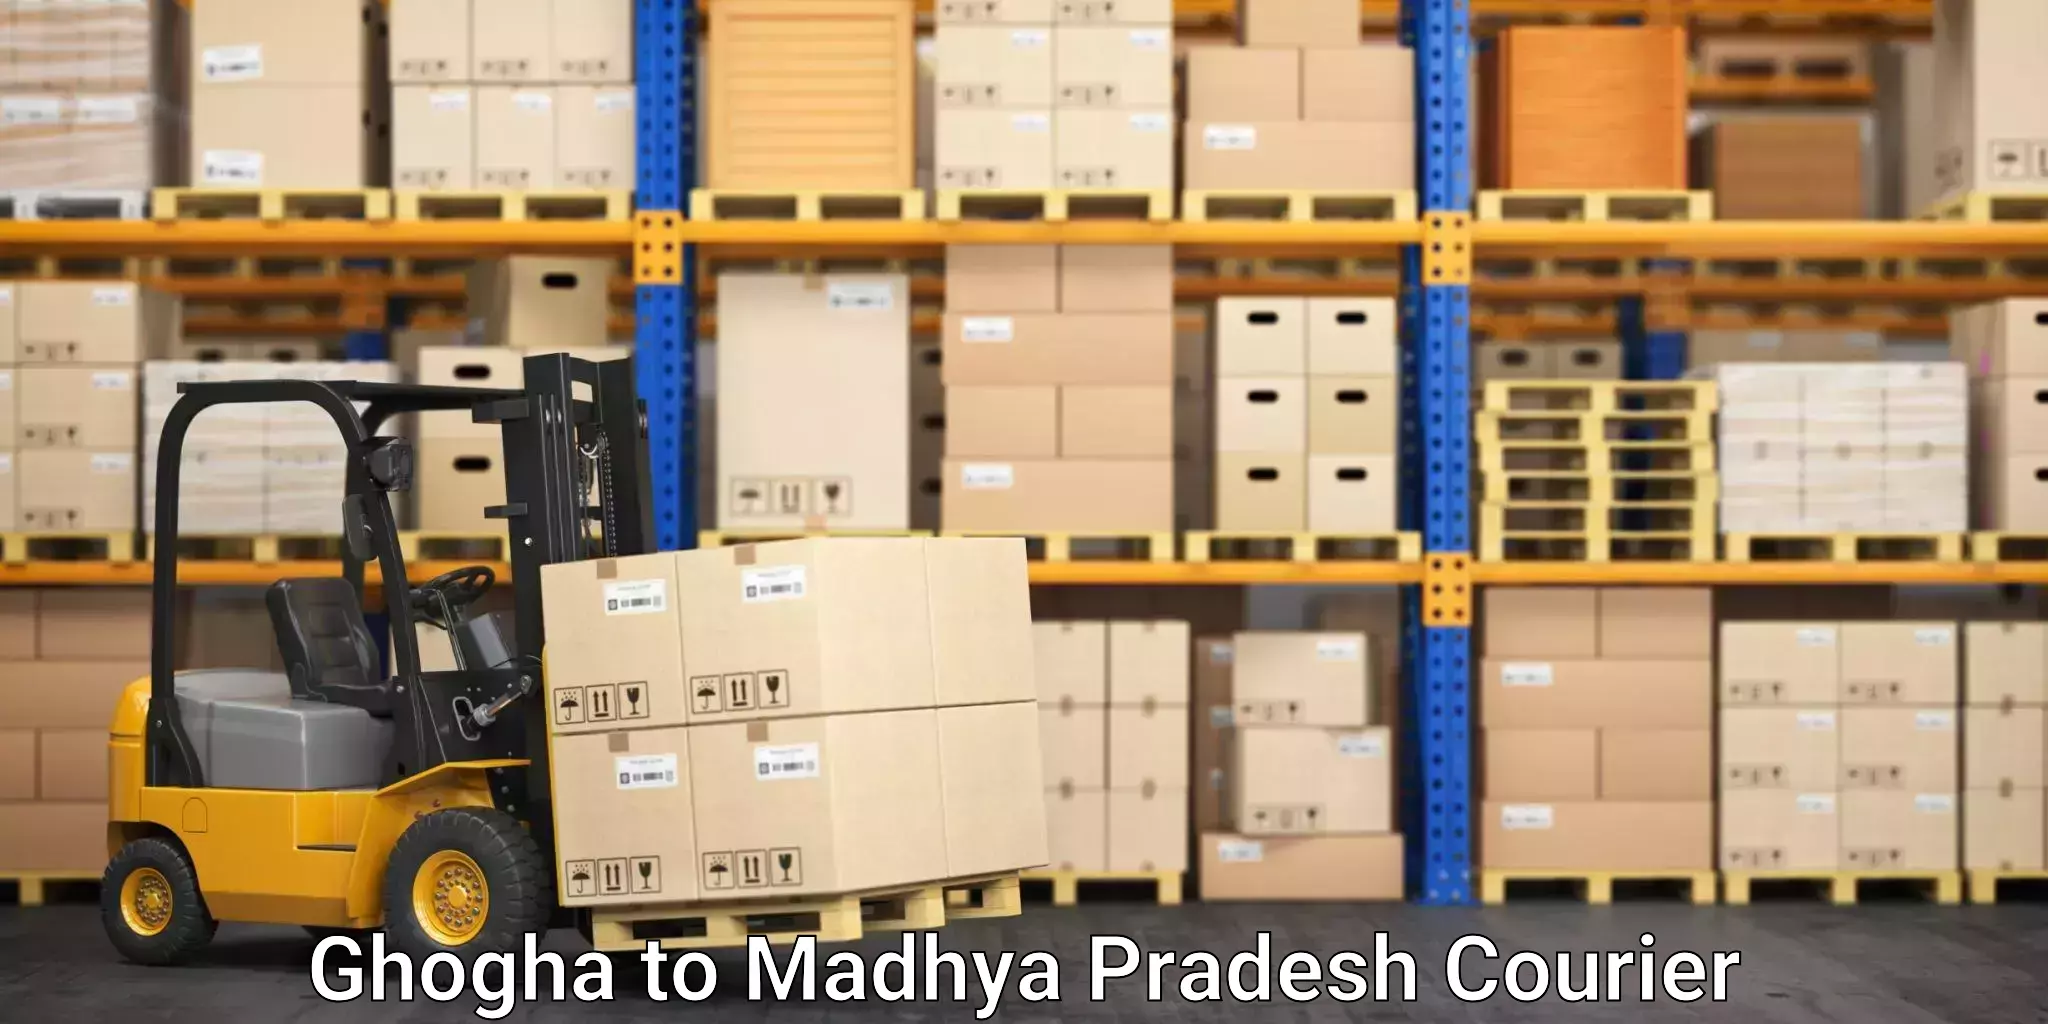 Moving and handling services Ghogha to Madhya Pradesh